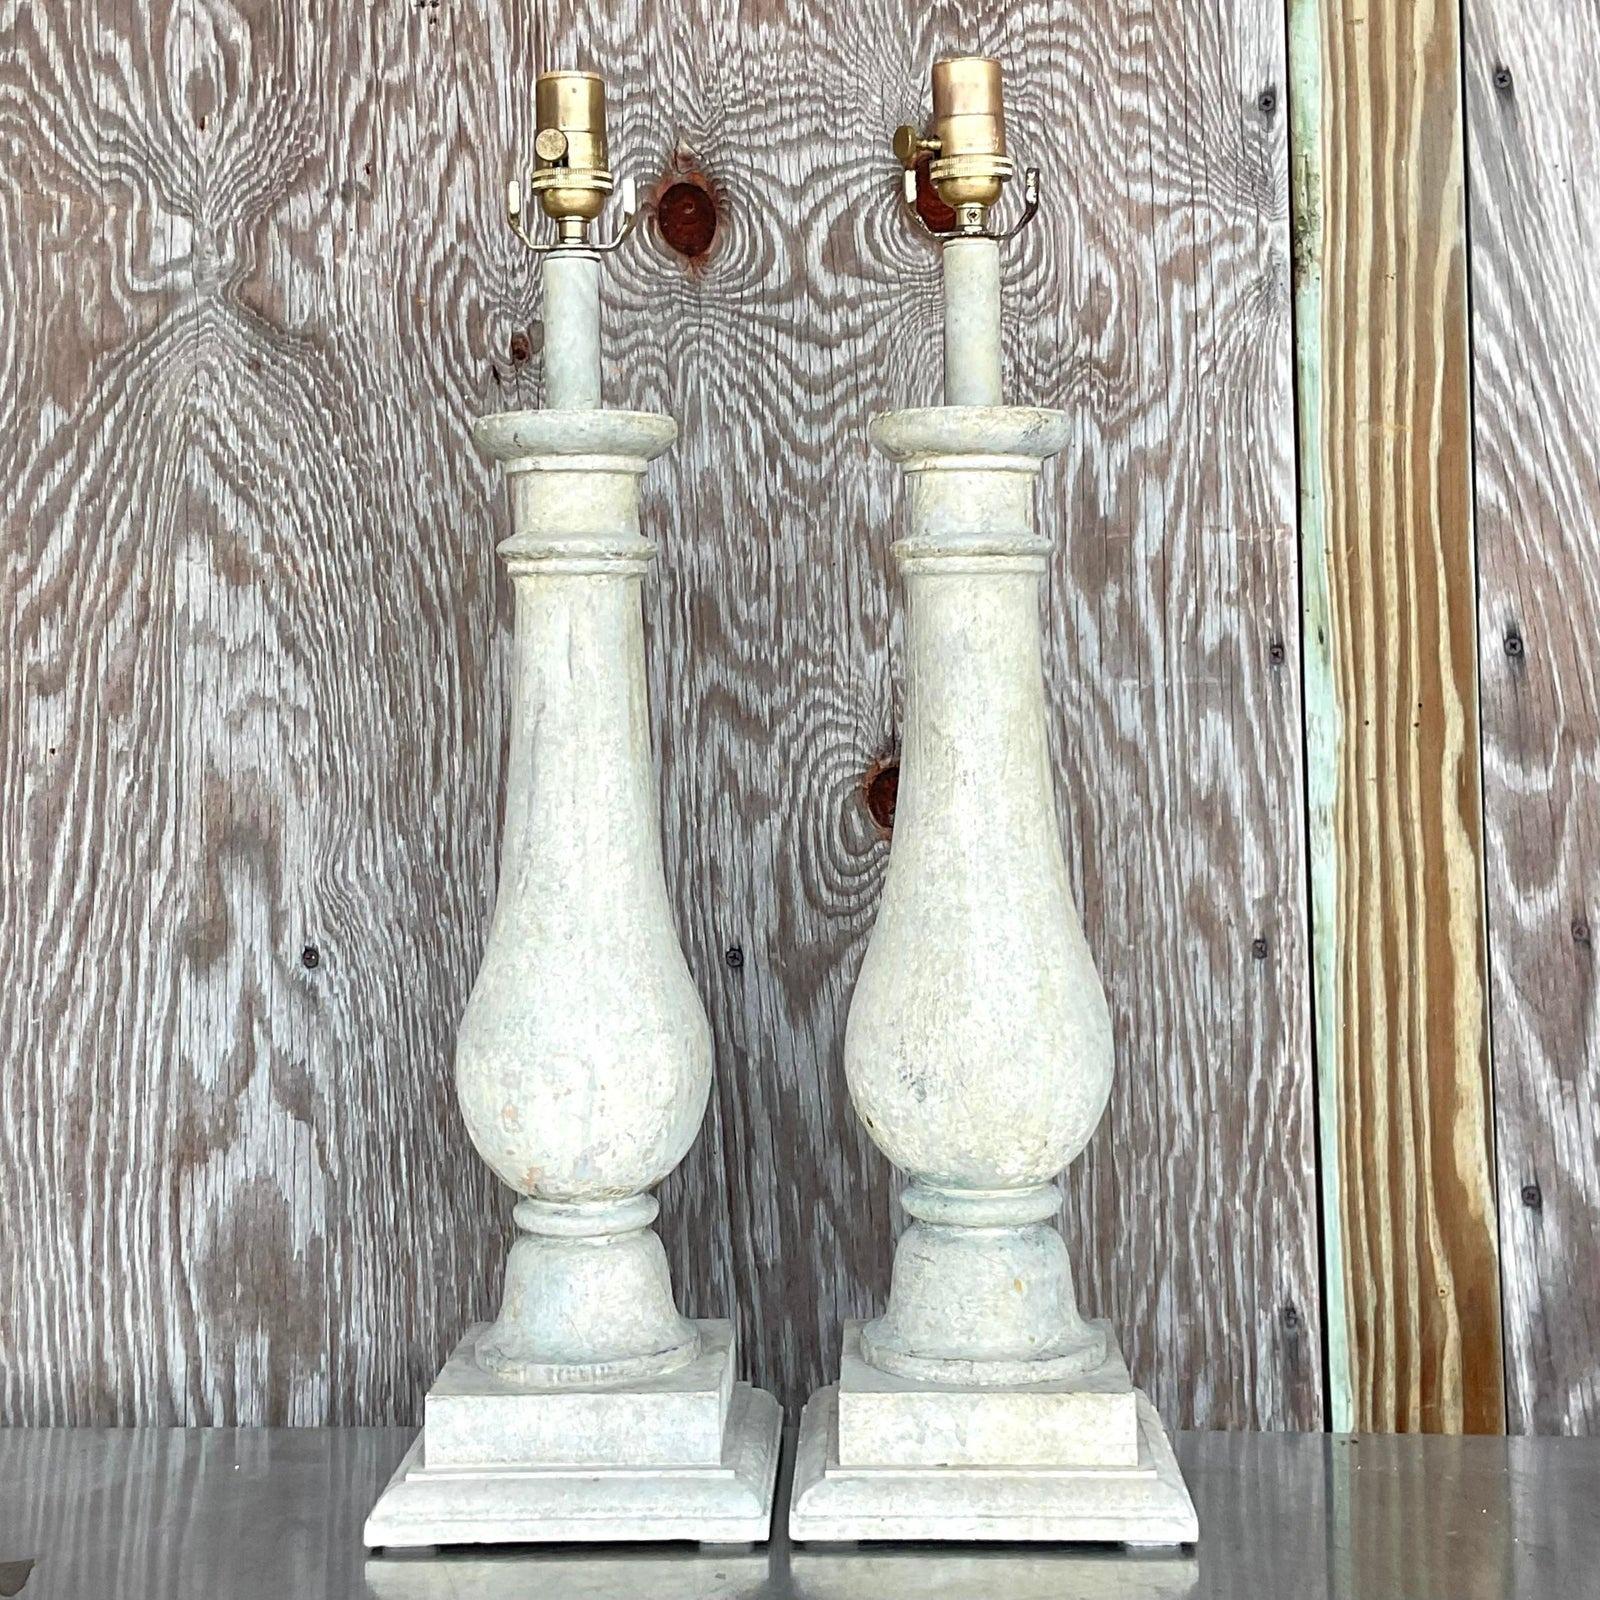 A spectacular pair of vintage Boho table lamps. Made by the iconic Gusto group in Palm Beach. Beautiful wood balustrade shape with a chic patinated finish. Acquired from a Palm Beach estate.